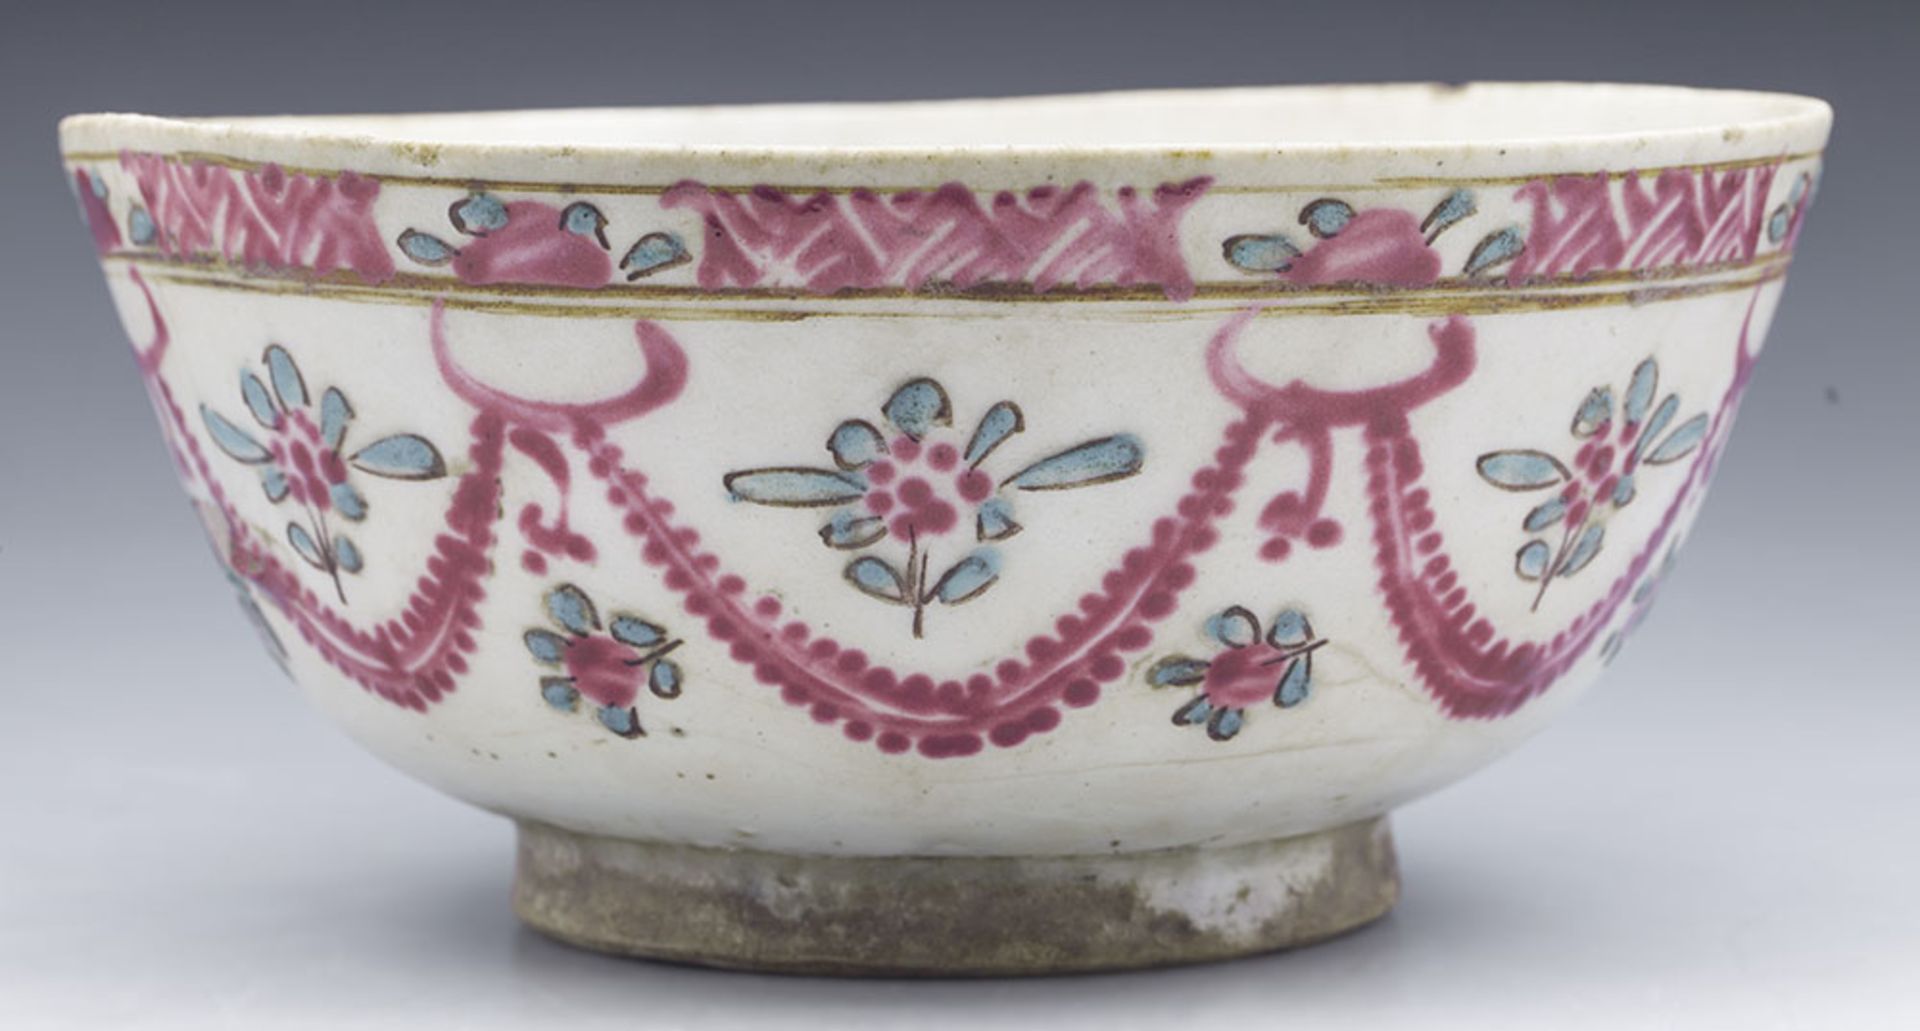 ANTIQUE MIDDLE EASTERN BOWL WITH FLORAL GARLANDS 17/18TH C.